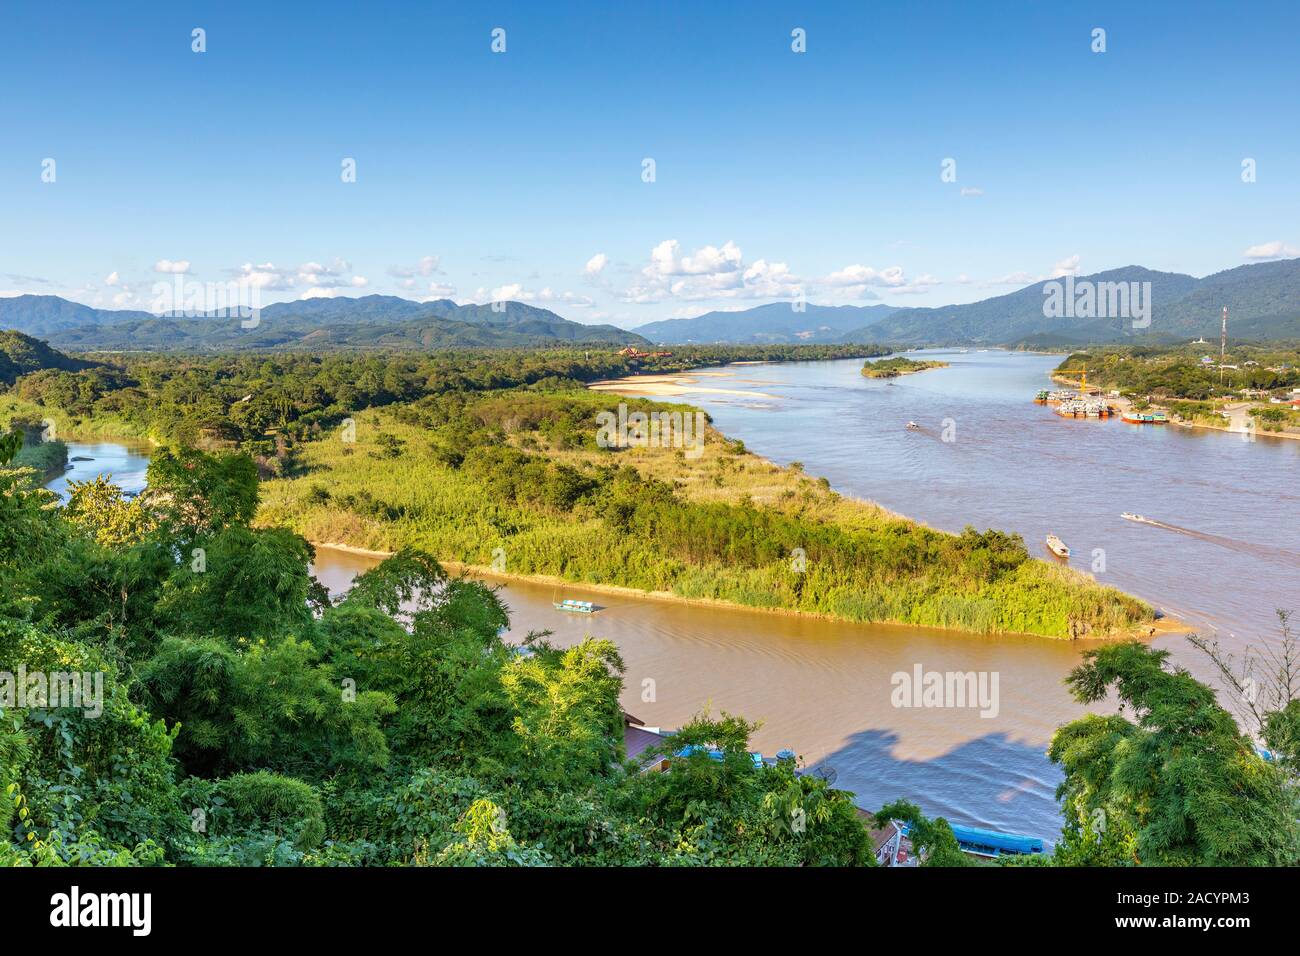 Golden Triangle at Mekong River, Chiang Rai Province, Thailand Stock Photo